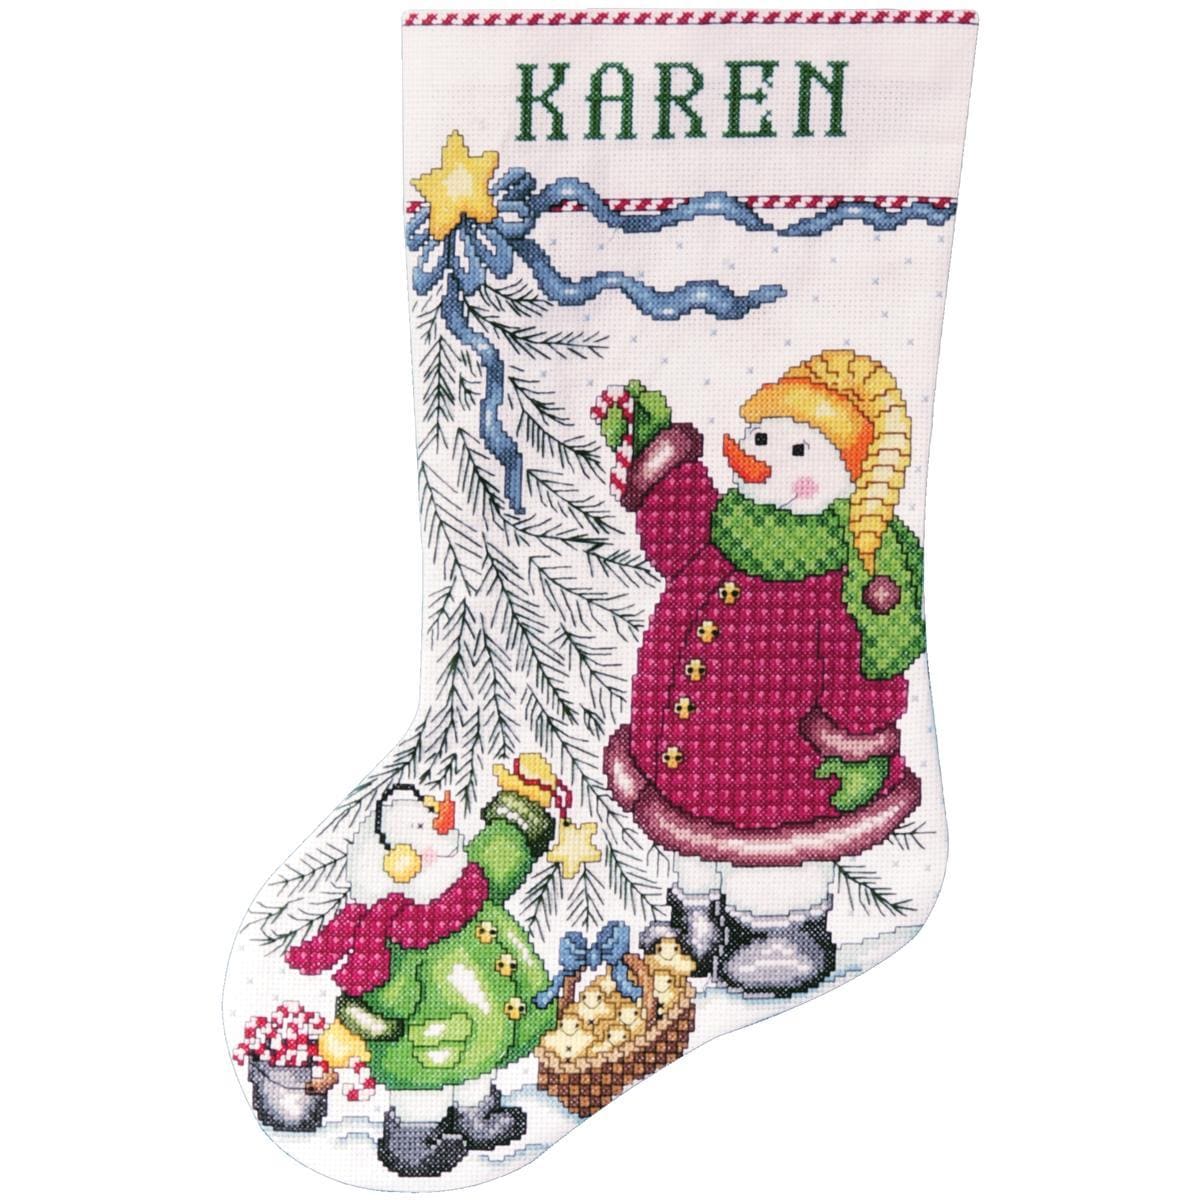 Trim A Tree Snowman Stocking Counted Cross Stitch Kit   17 Long 14 Count Design Works Cross Stitch Kits